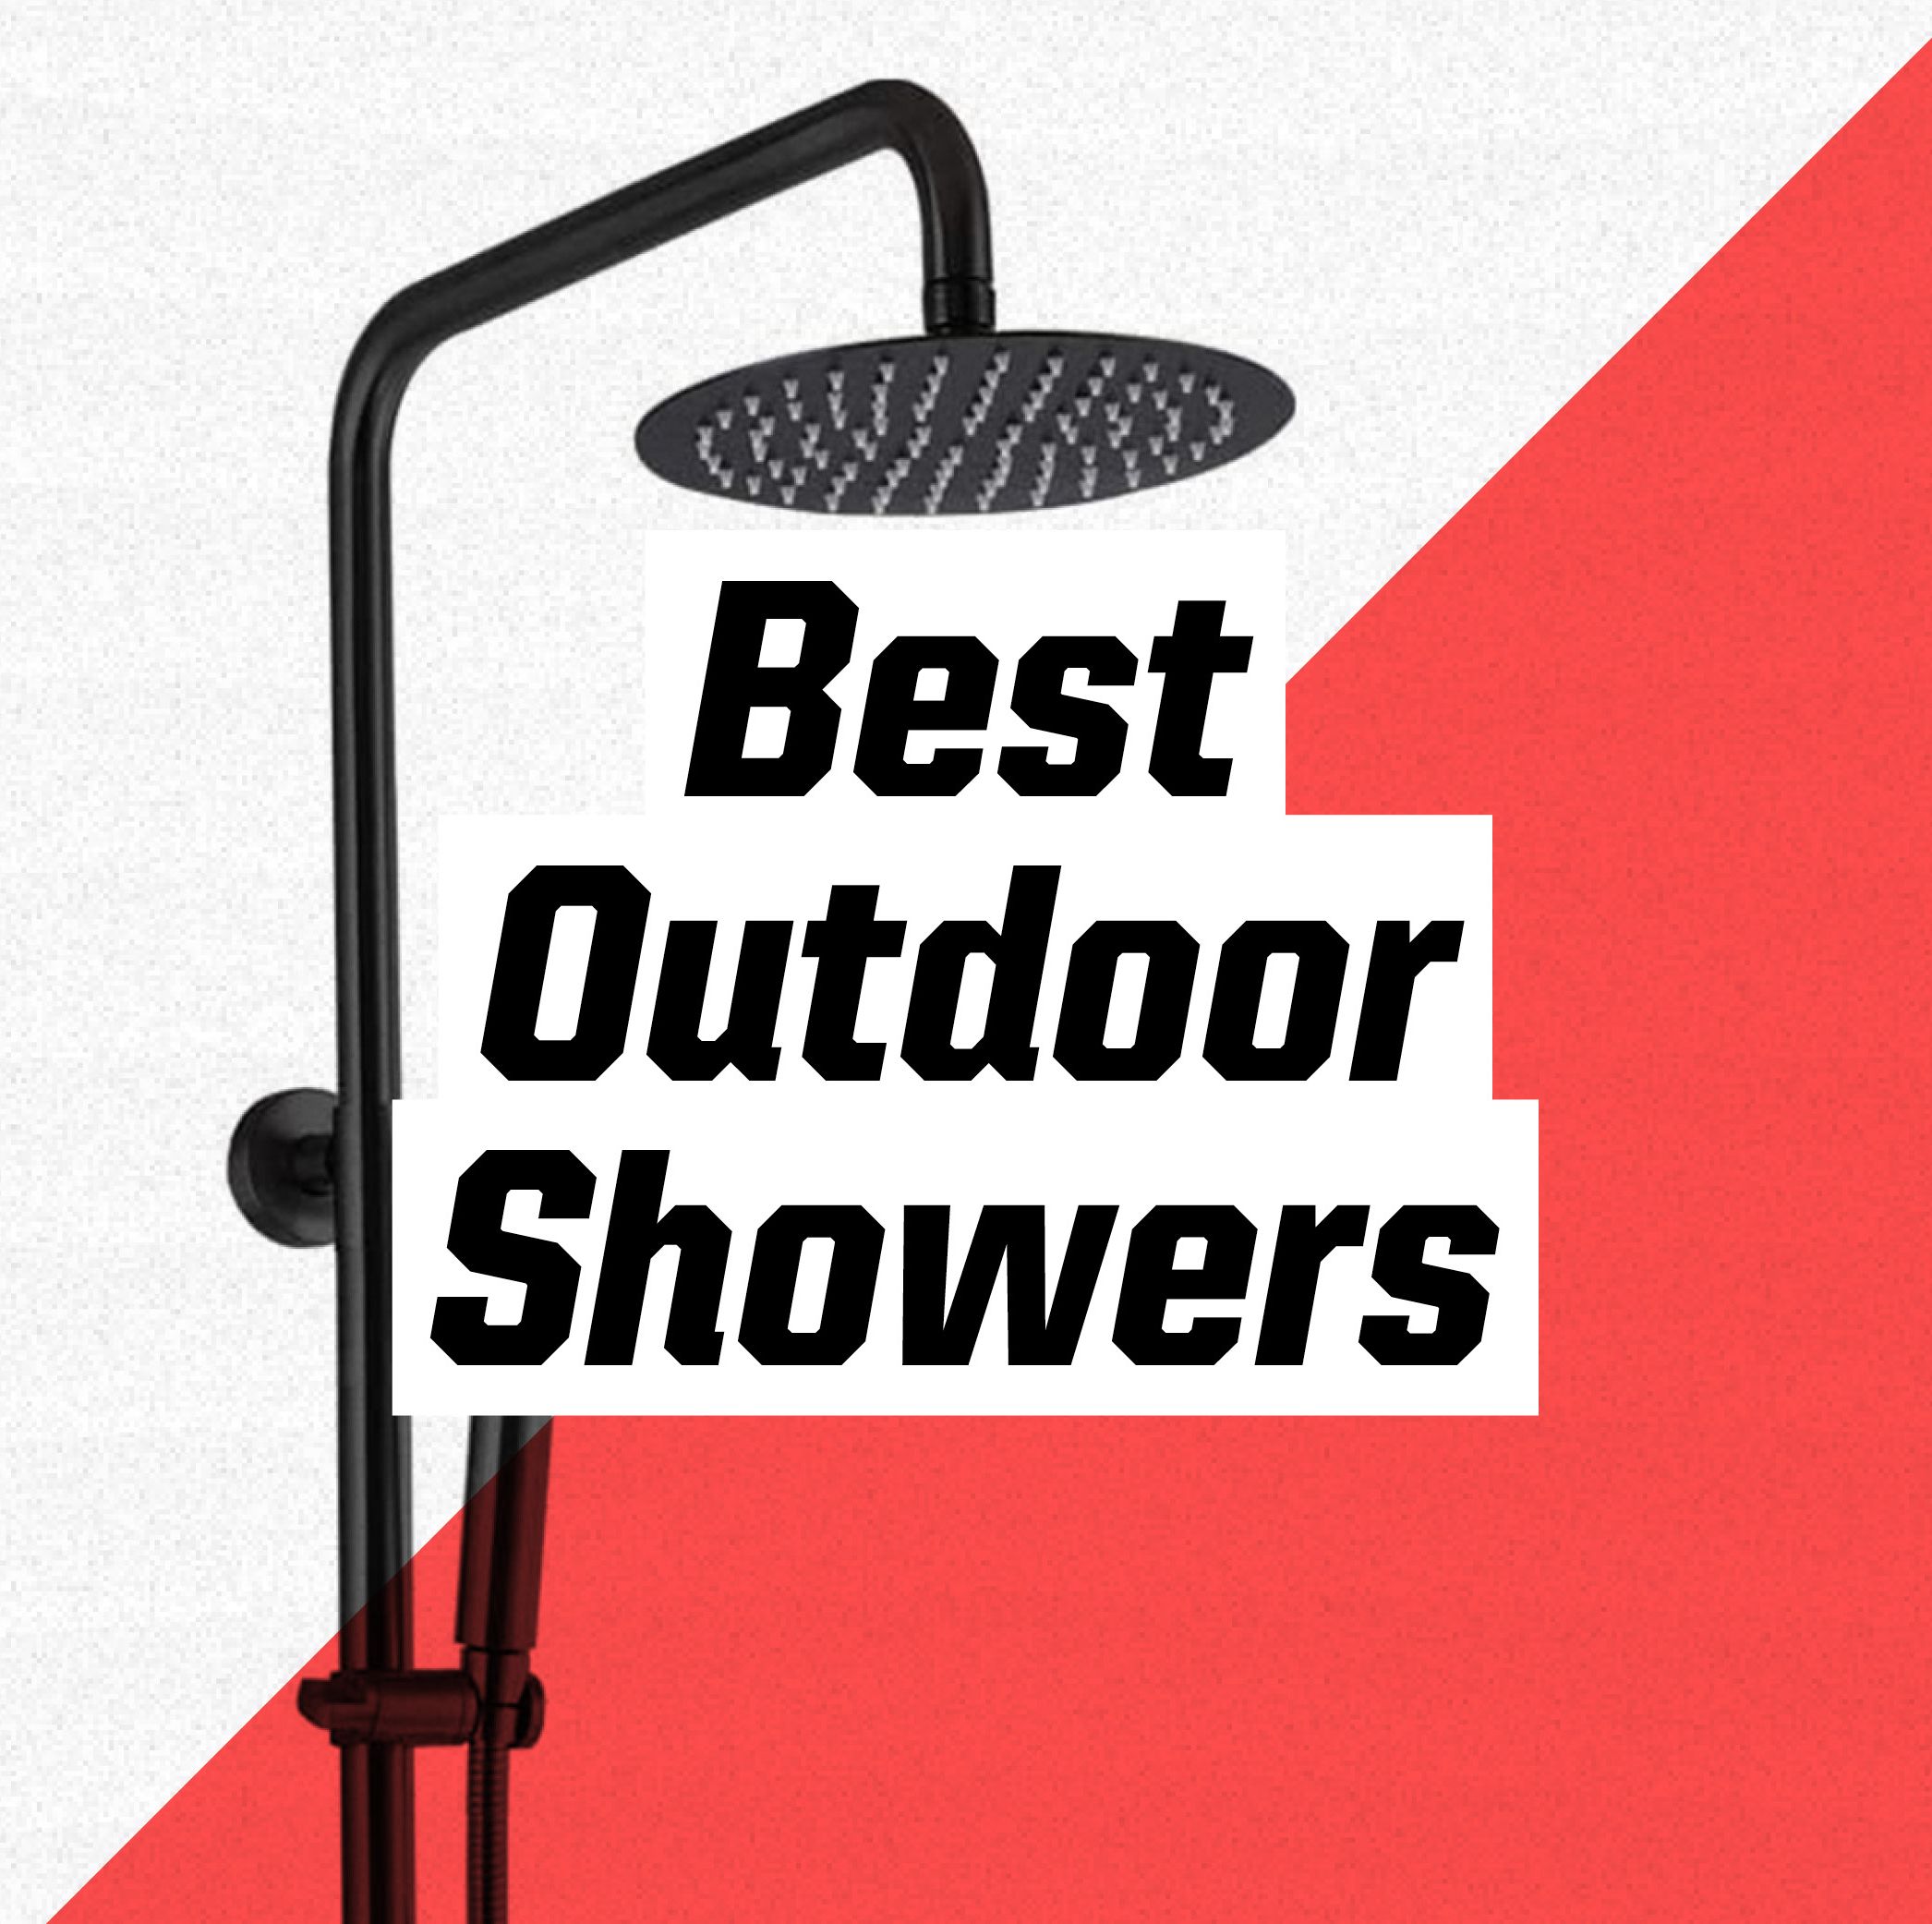 Turn Your Outdoor Space Into a Mini Spa With These Top-Rated Outdoor Showers